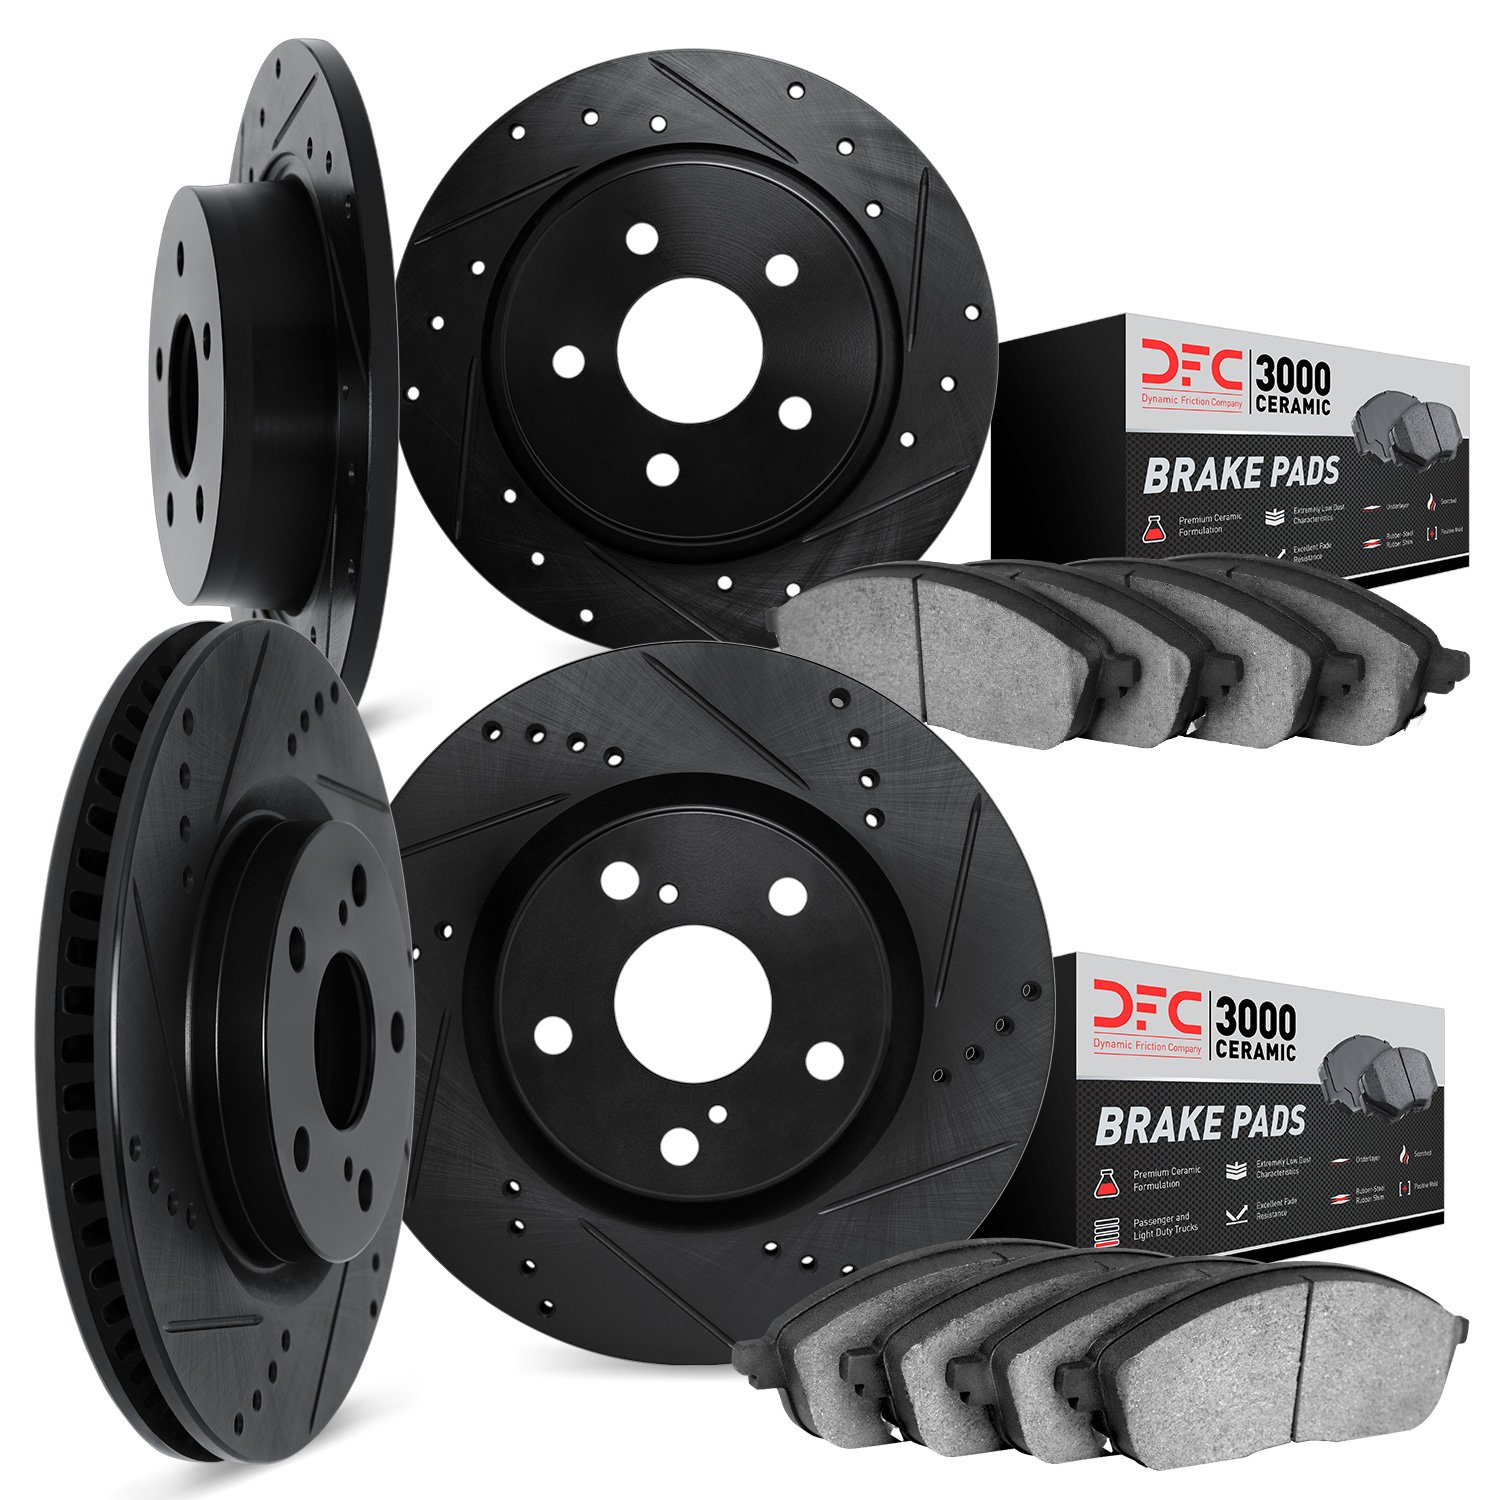 8304-13004 Drilled/Slotted Brake Rotors with 3000-Series Ceramic Brake Pads Kit [Black], 1992-1997 Subaru, Position: Front and R